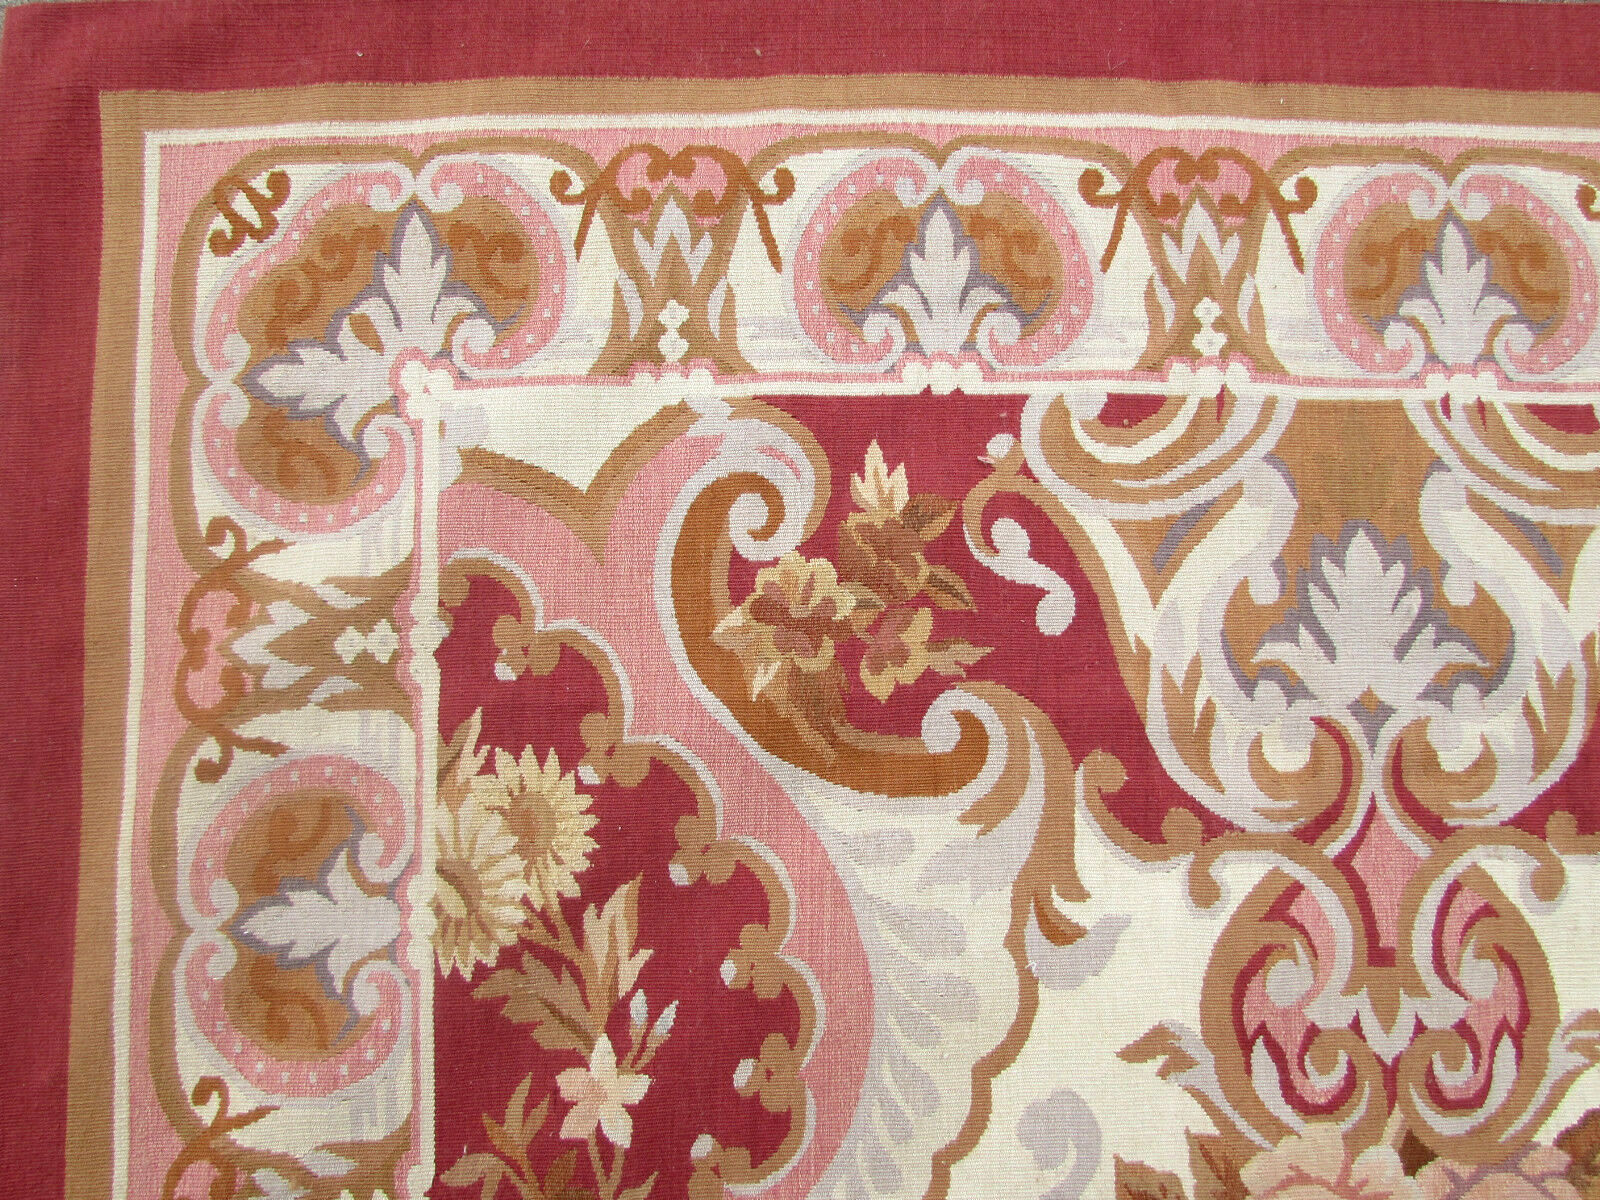 Handmade craftsmanship of the Aubusson Rug shown in detail